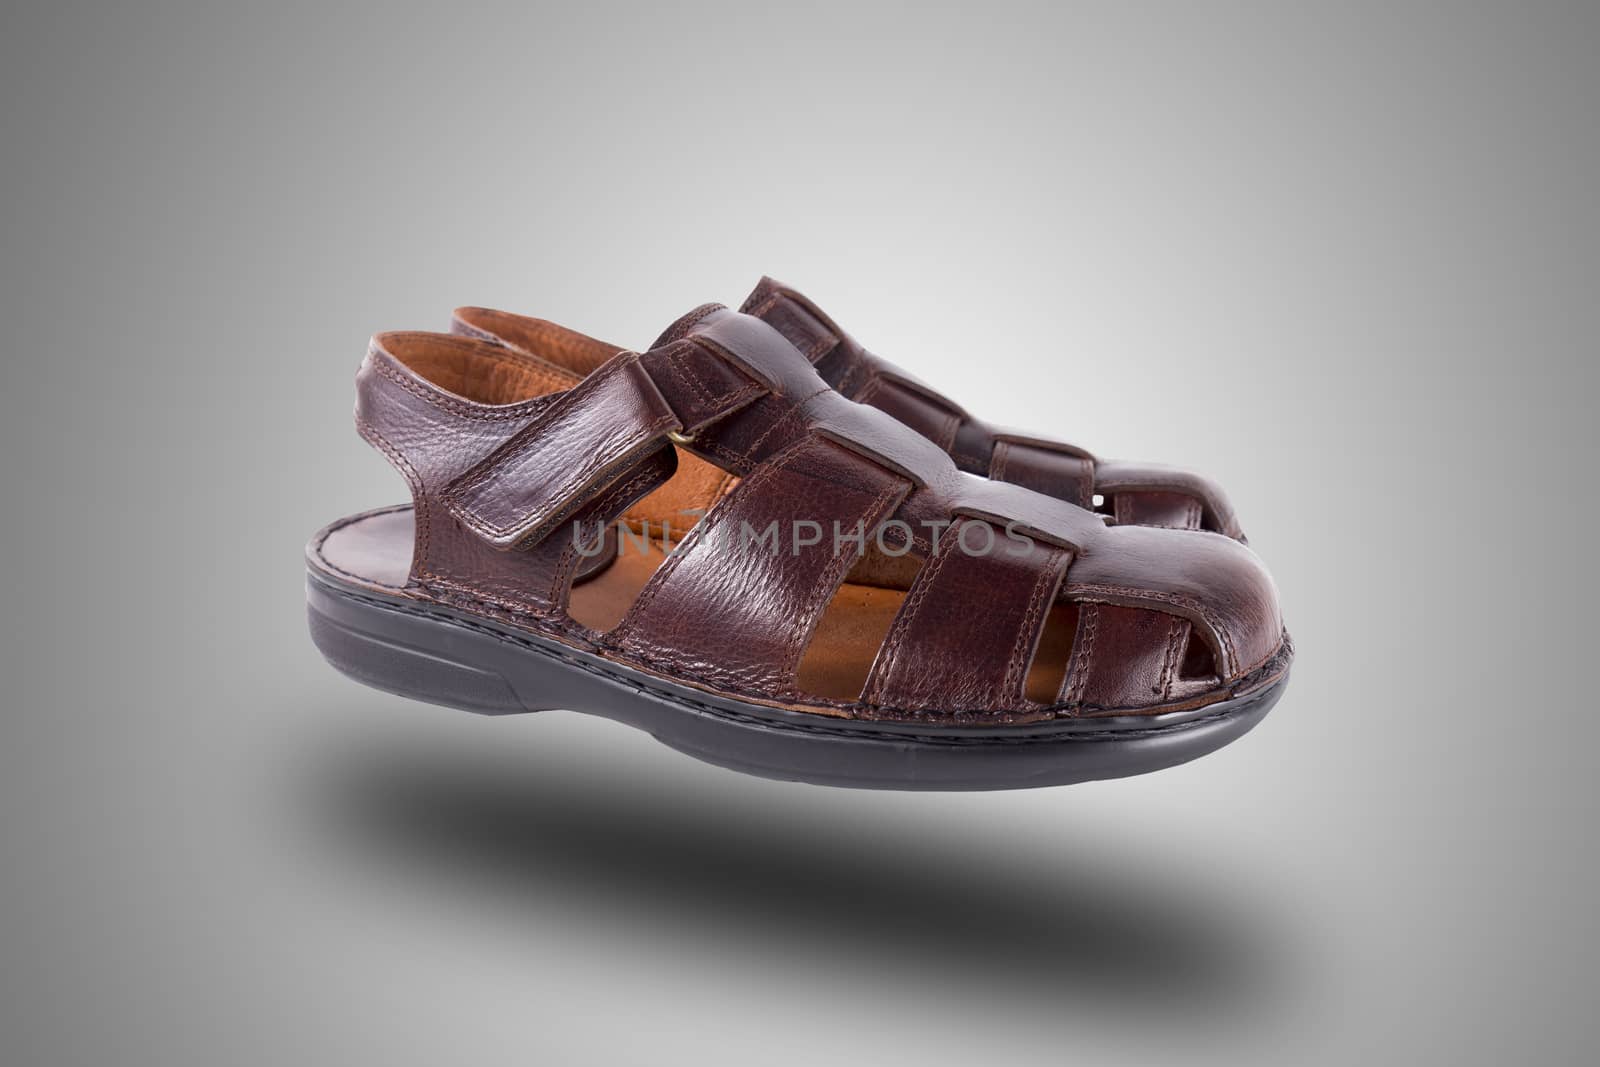 Pair of brown leather sandal on grey background, isolated product.